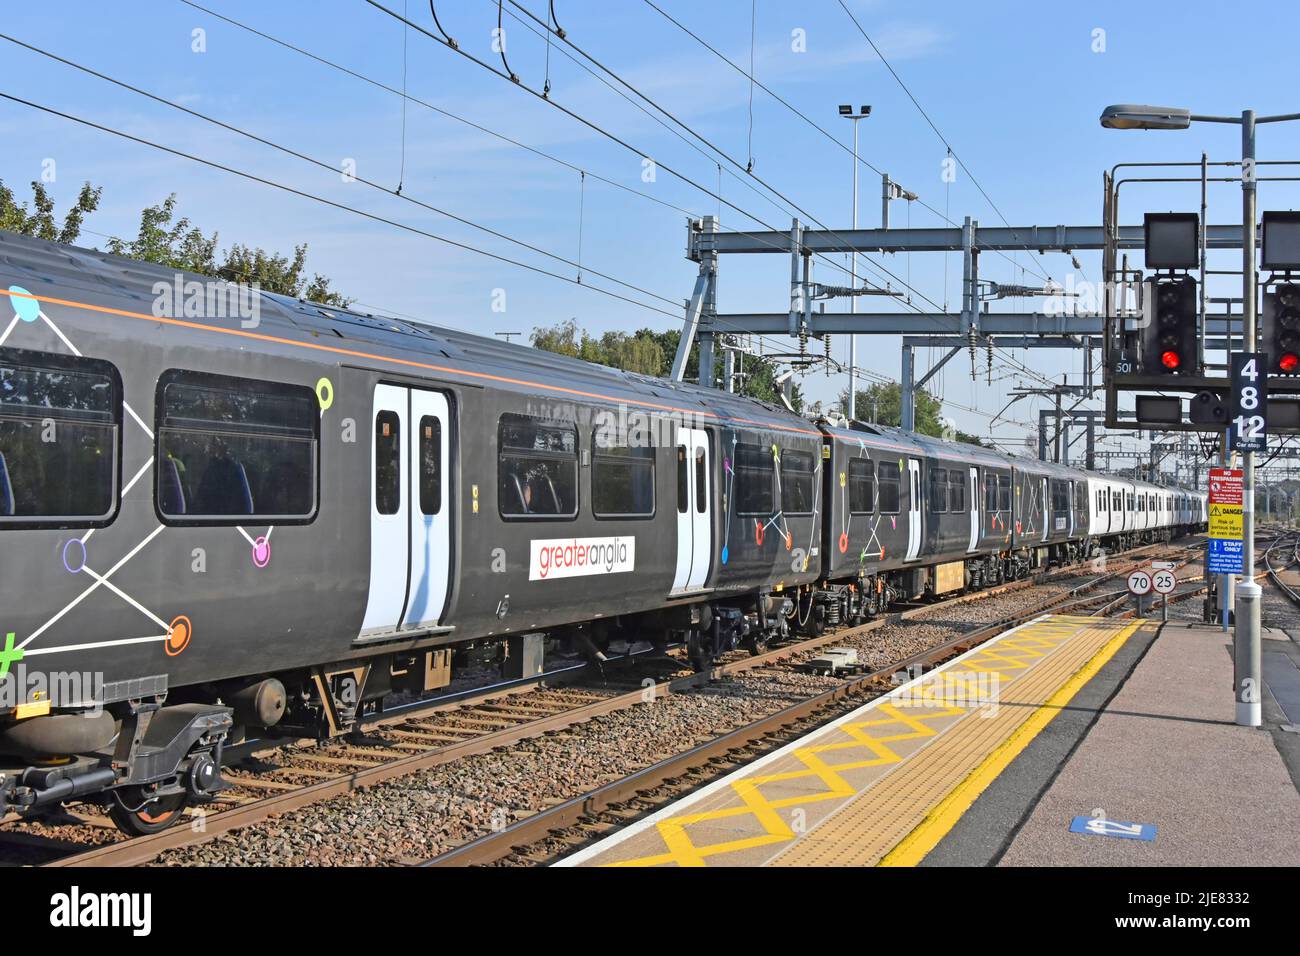 Greater Anglia electric train carriages in unusual grey livery colour with white doors & strange linear graphics seen at Shenfield railway station UK Stock Photo